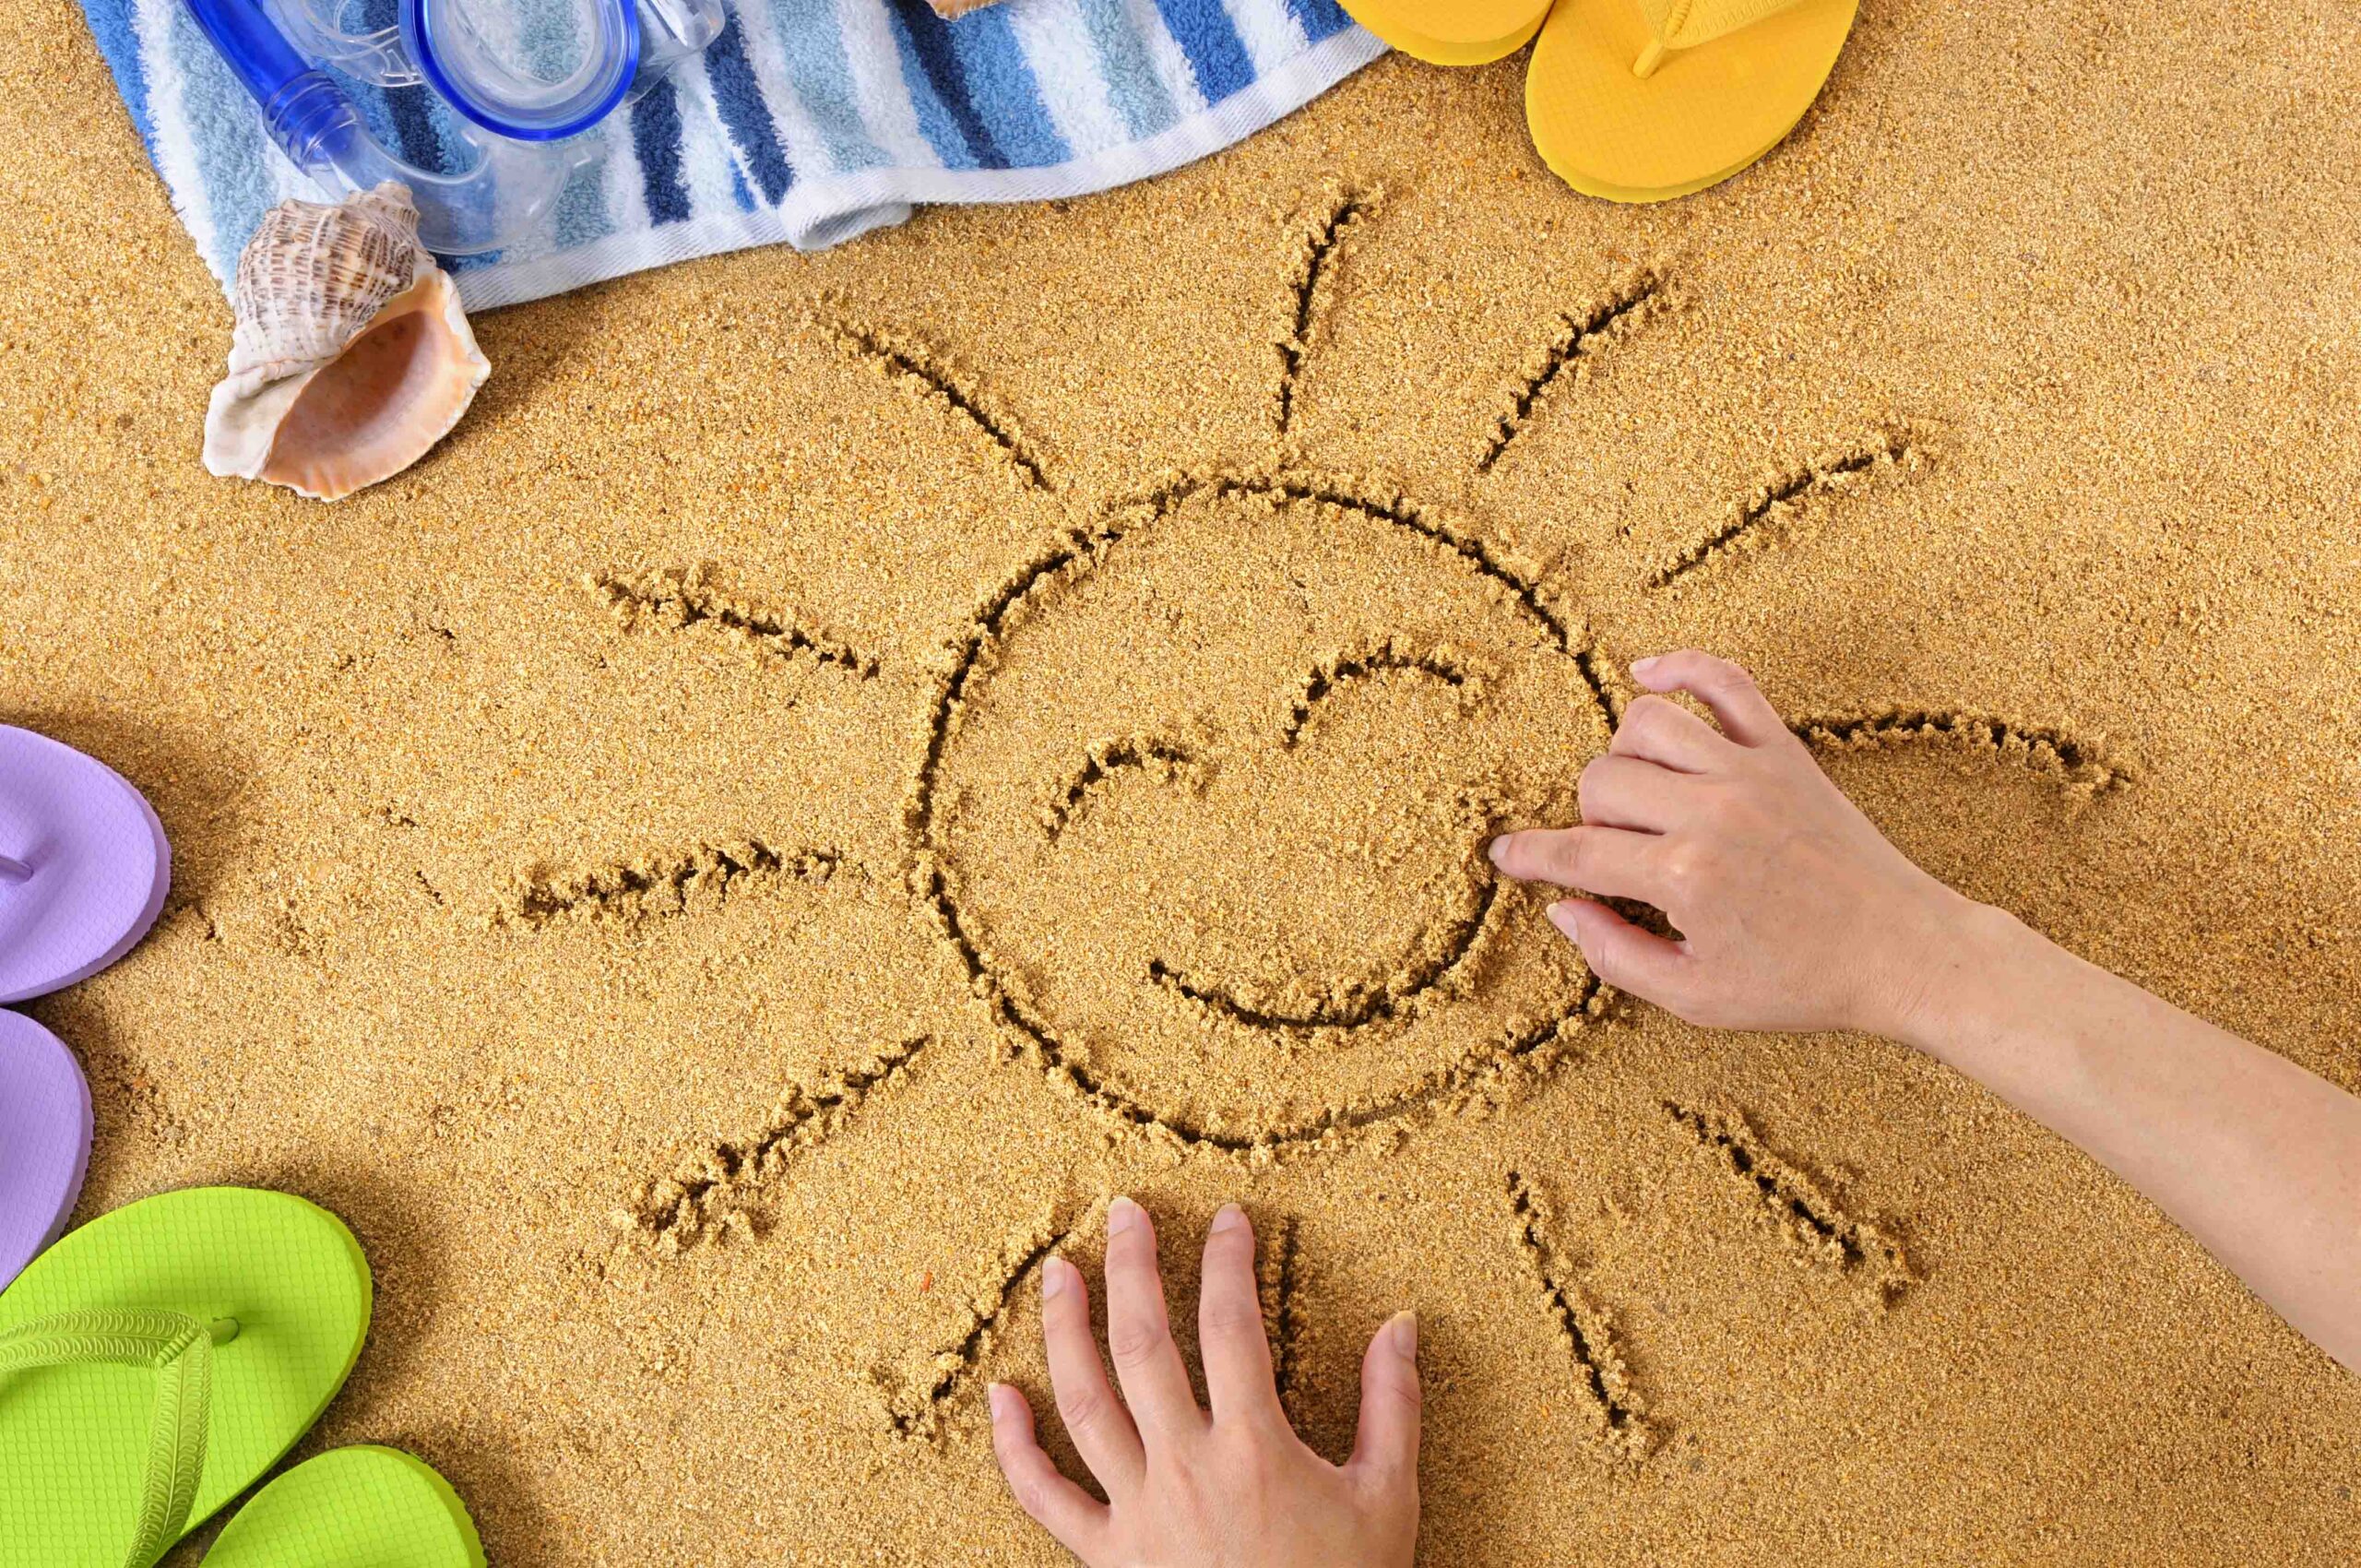 Child drawing a smiley sun in sand with towel, seashells and flip flops